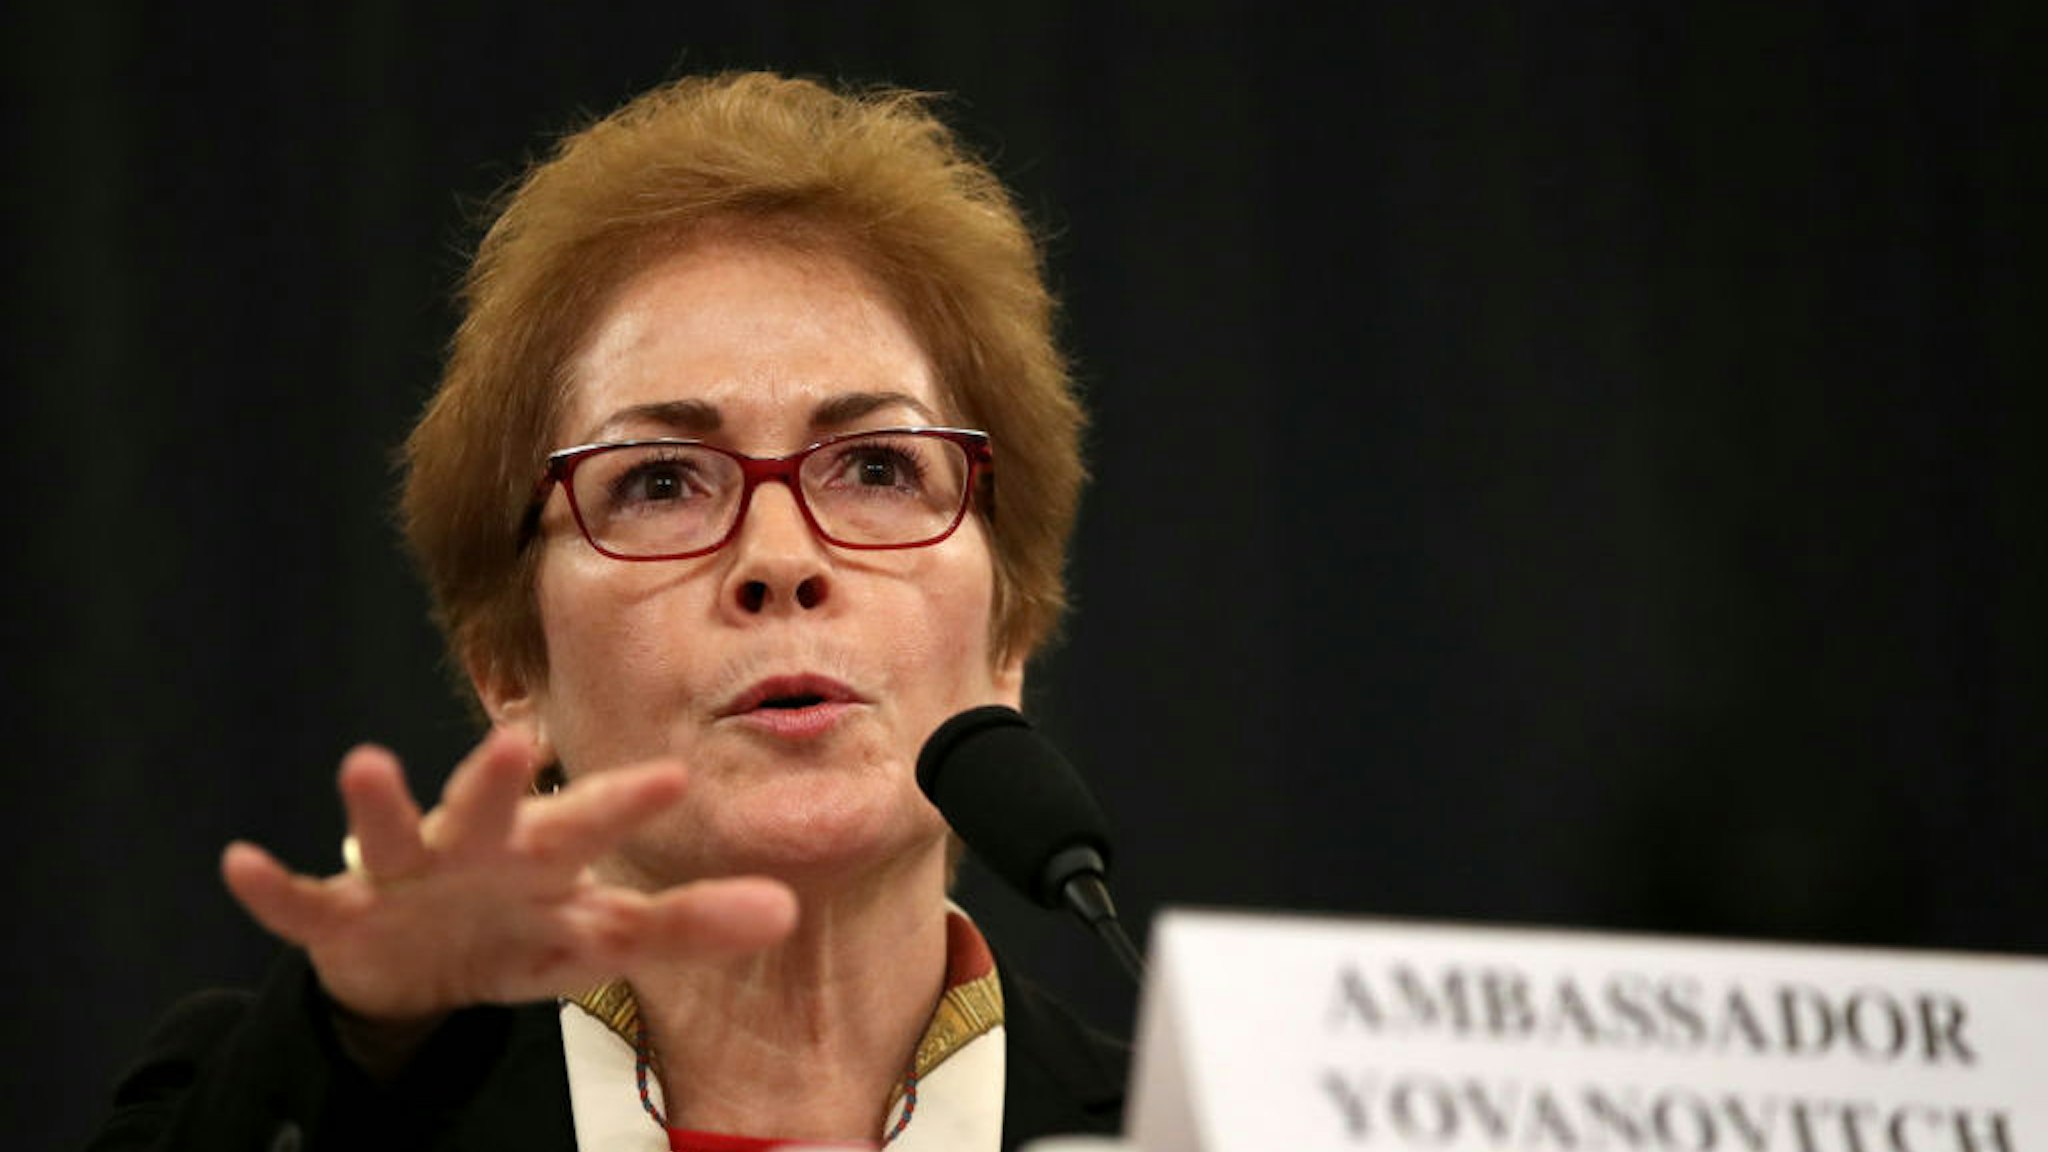 Former U.S. Ambassador to Ukraine Marie Yovanovitch testifies before the House Intelligence Committee in the Longworth House Office Building on Capitol Hill November 15, 2019 in Washington, DC. In the second impeachment hearing held by the committee, House Democrats continue to build a case against U.S. President Donald Trump‚Äôs efforts to link U.S. military aid for Ukraine to the nation‚Äôs investigation of his political rivals. (Photo by Drew Angerer/Getty Images)